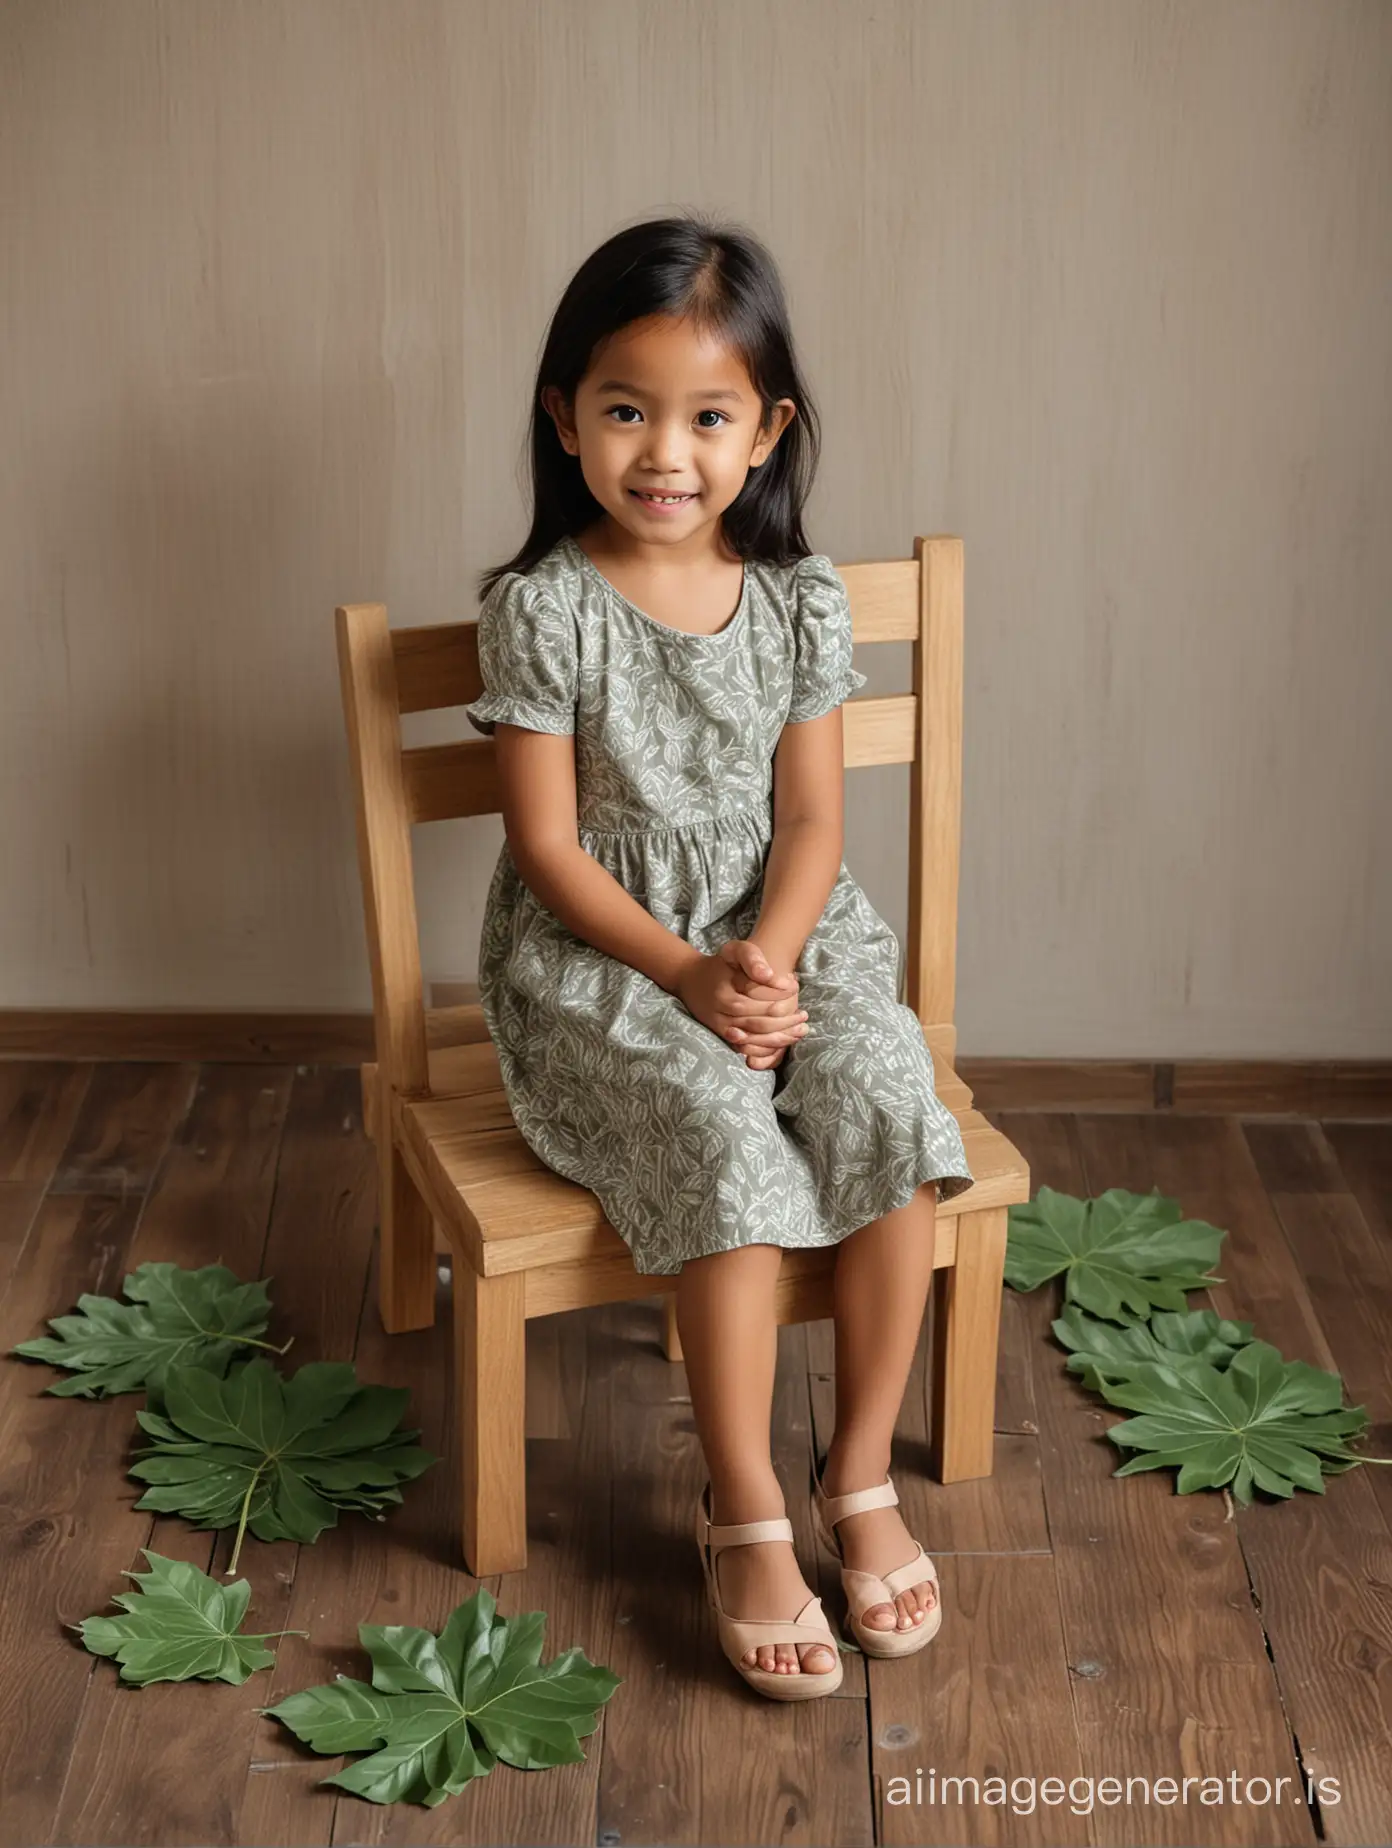 SixYearOld-Indonesian-Girl-Sitting-on-Wooden-Chair-in-Natural-Woodthemed-Interior